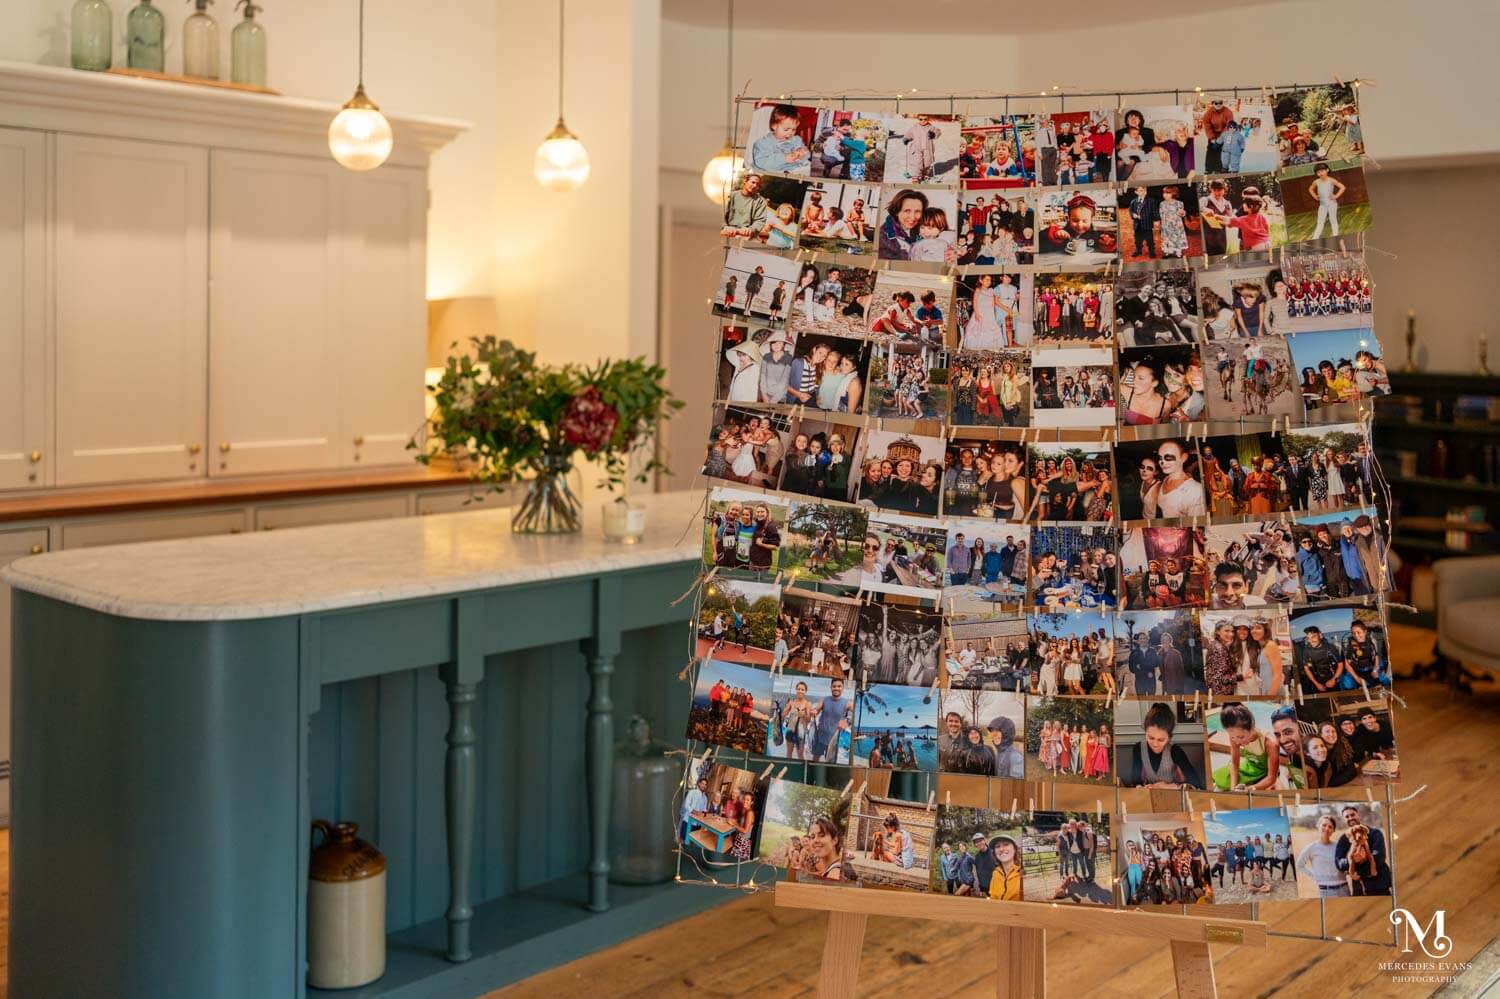 the lounge/kitchen area at millbridge court is decorated with lots of photographs that are pegged on a frame which stands on a large easel